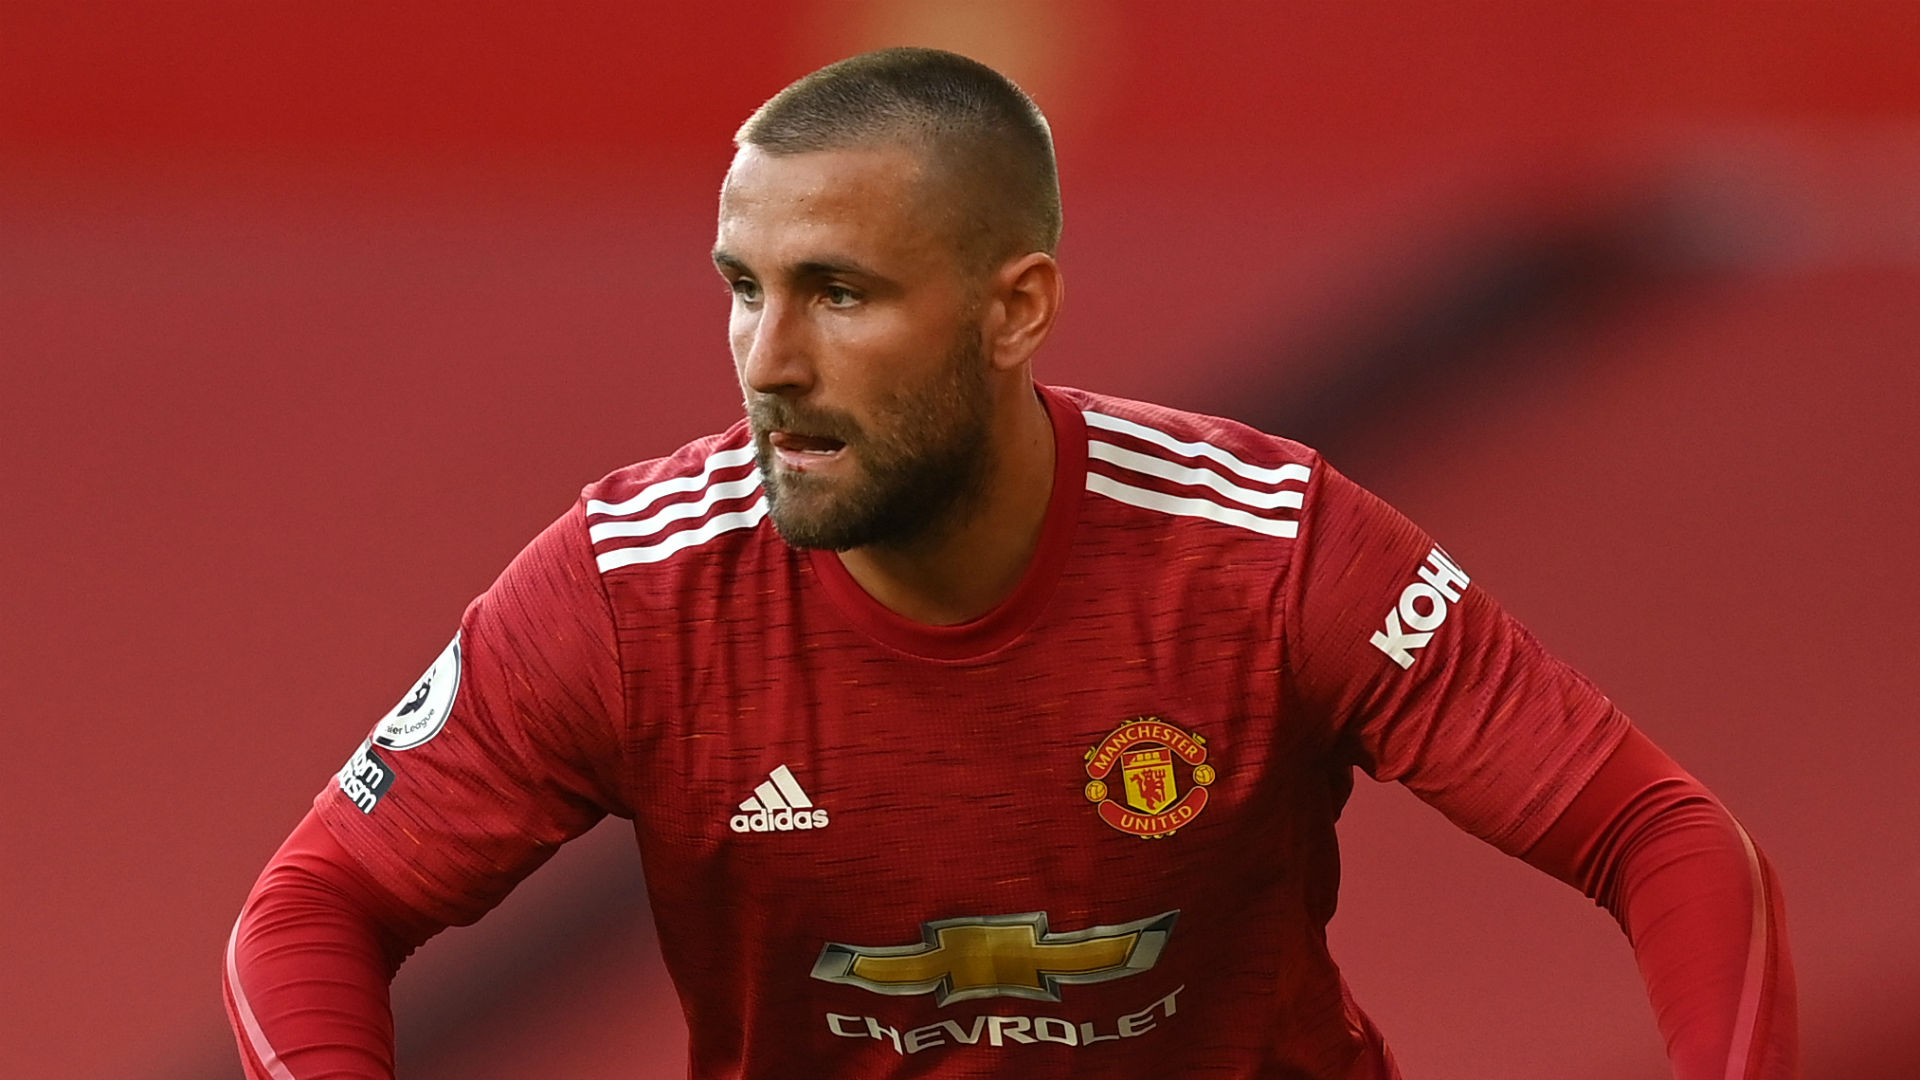 'I know what's needed' - Shaw happy to play mentor role in Manchester United squad